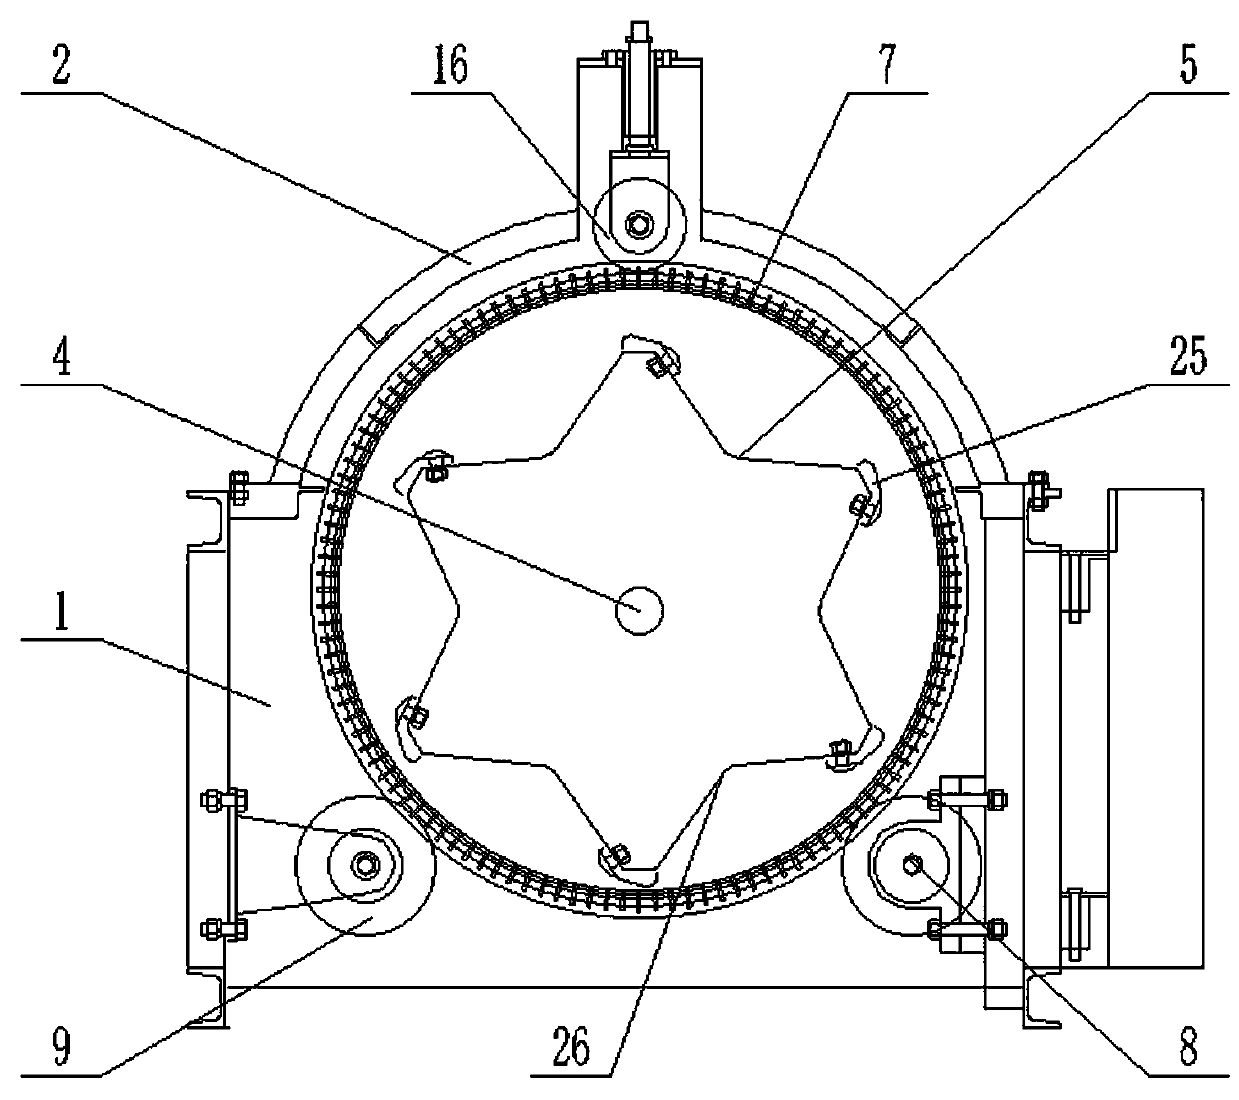 Rotary threshing device with inner roller and outer roller for coarse cereal crops